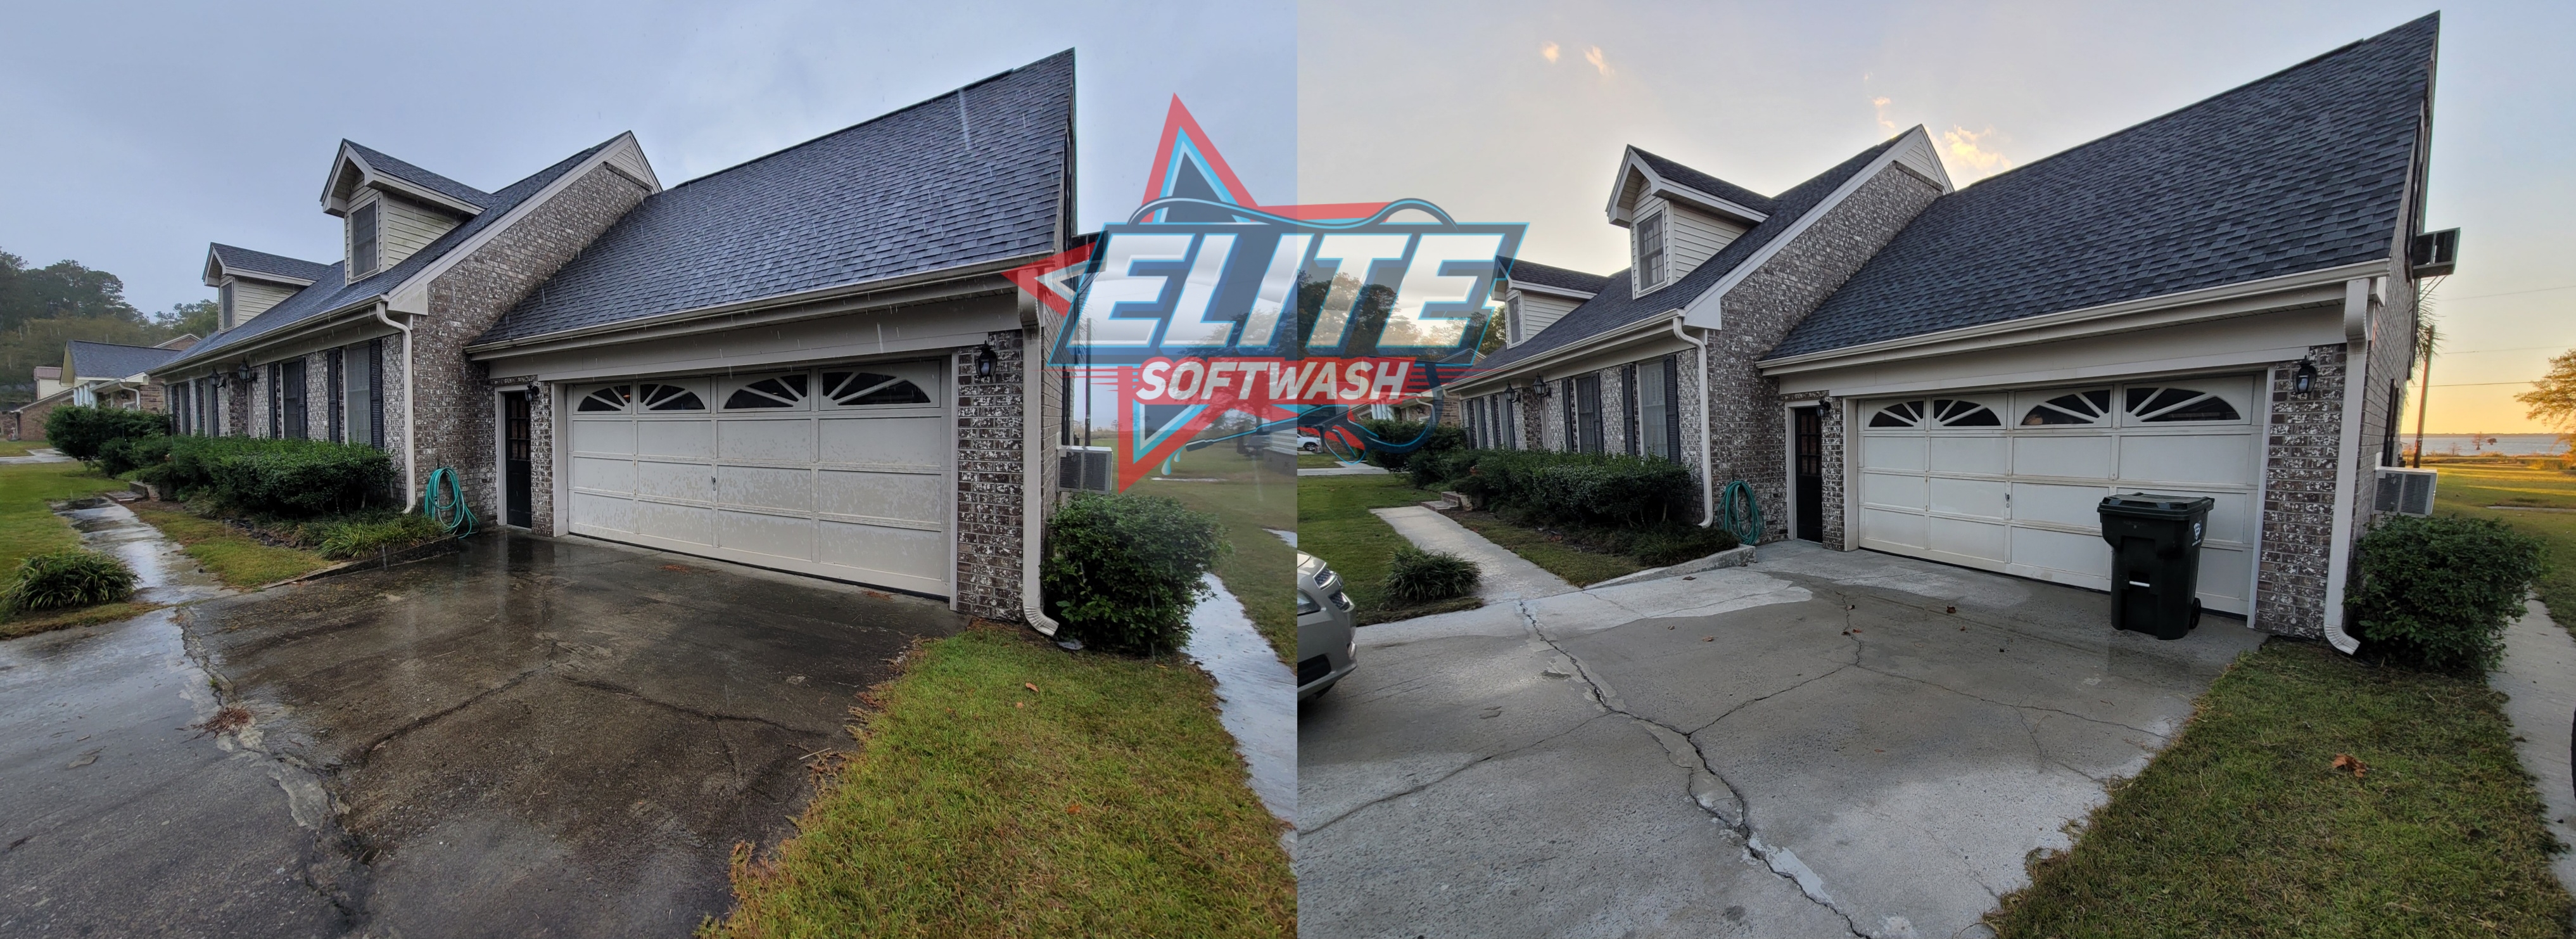 Top Quality Exterior Softwashing, Concrete Cleaning & Brick Cleaning in Monks Corner South Carolina!